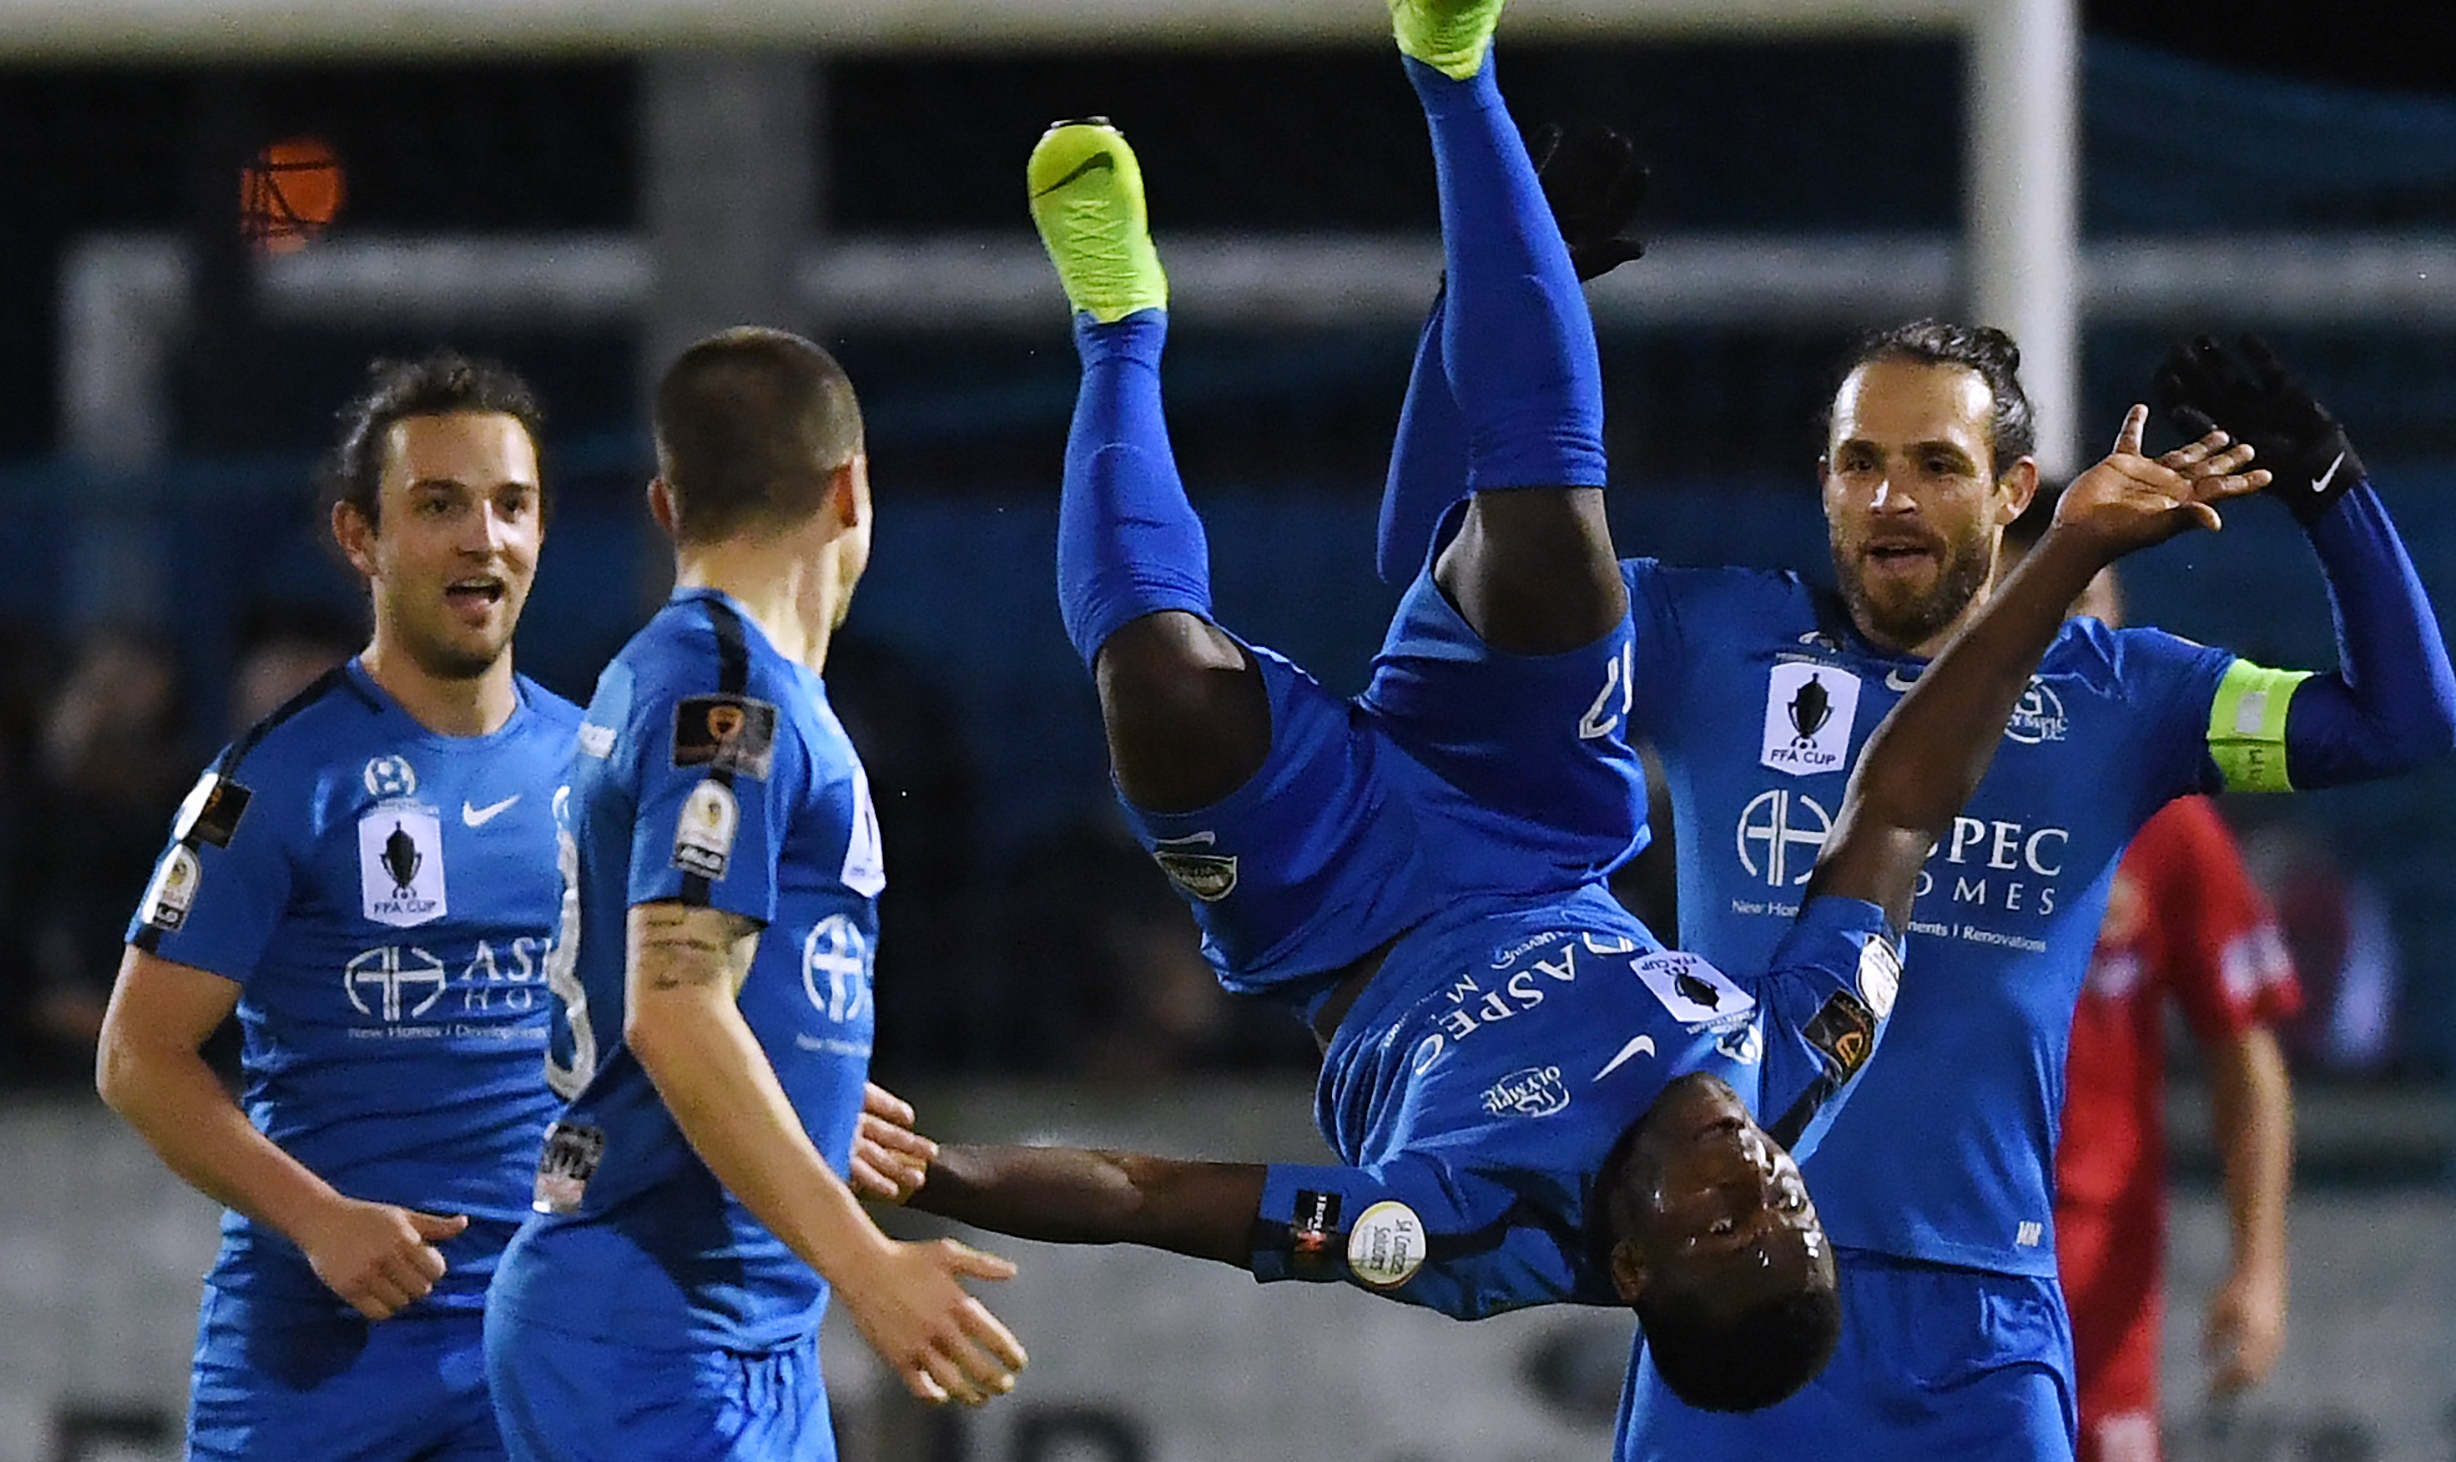 Re-live another thrilling night in the FFA Cup 2019